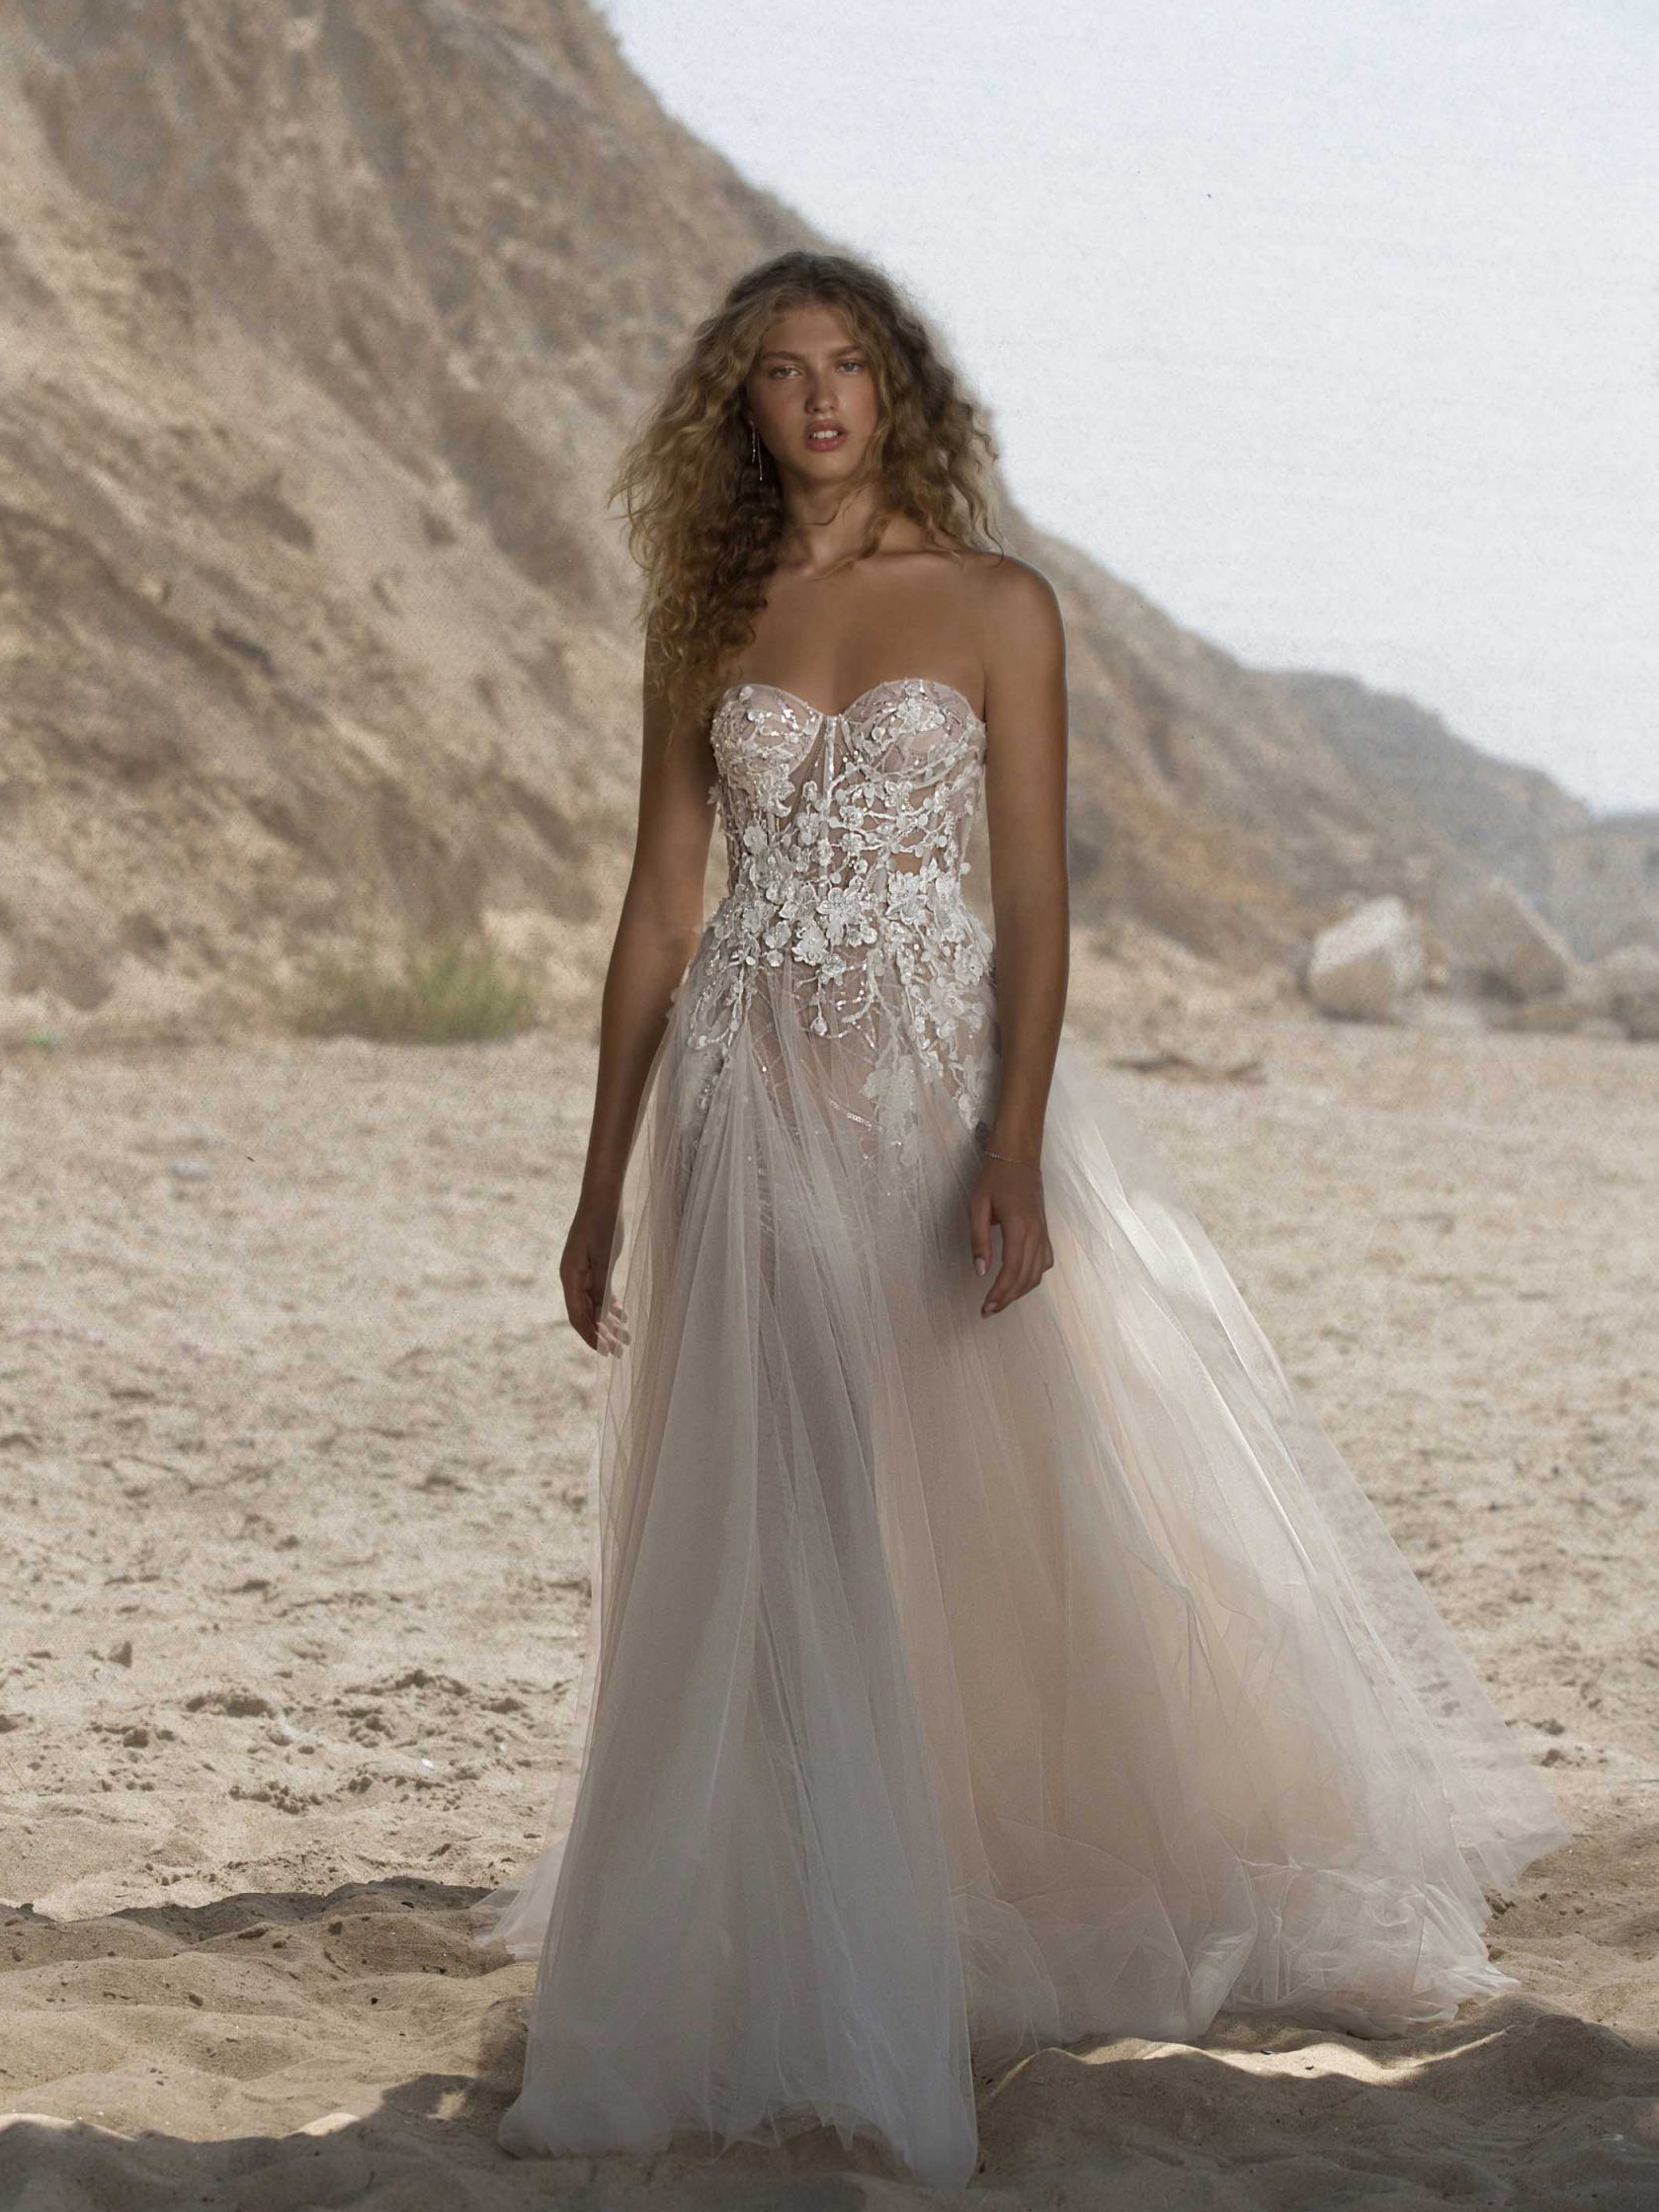 21-HILA Bridal Dress Inspirated By Berta Muse 2021 Vista Mare Collection